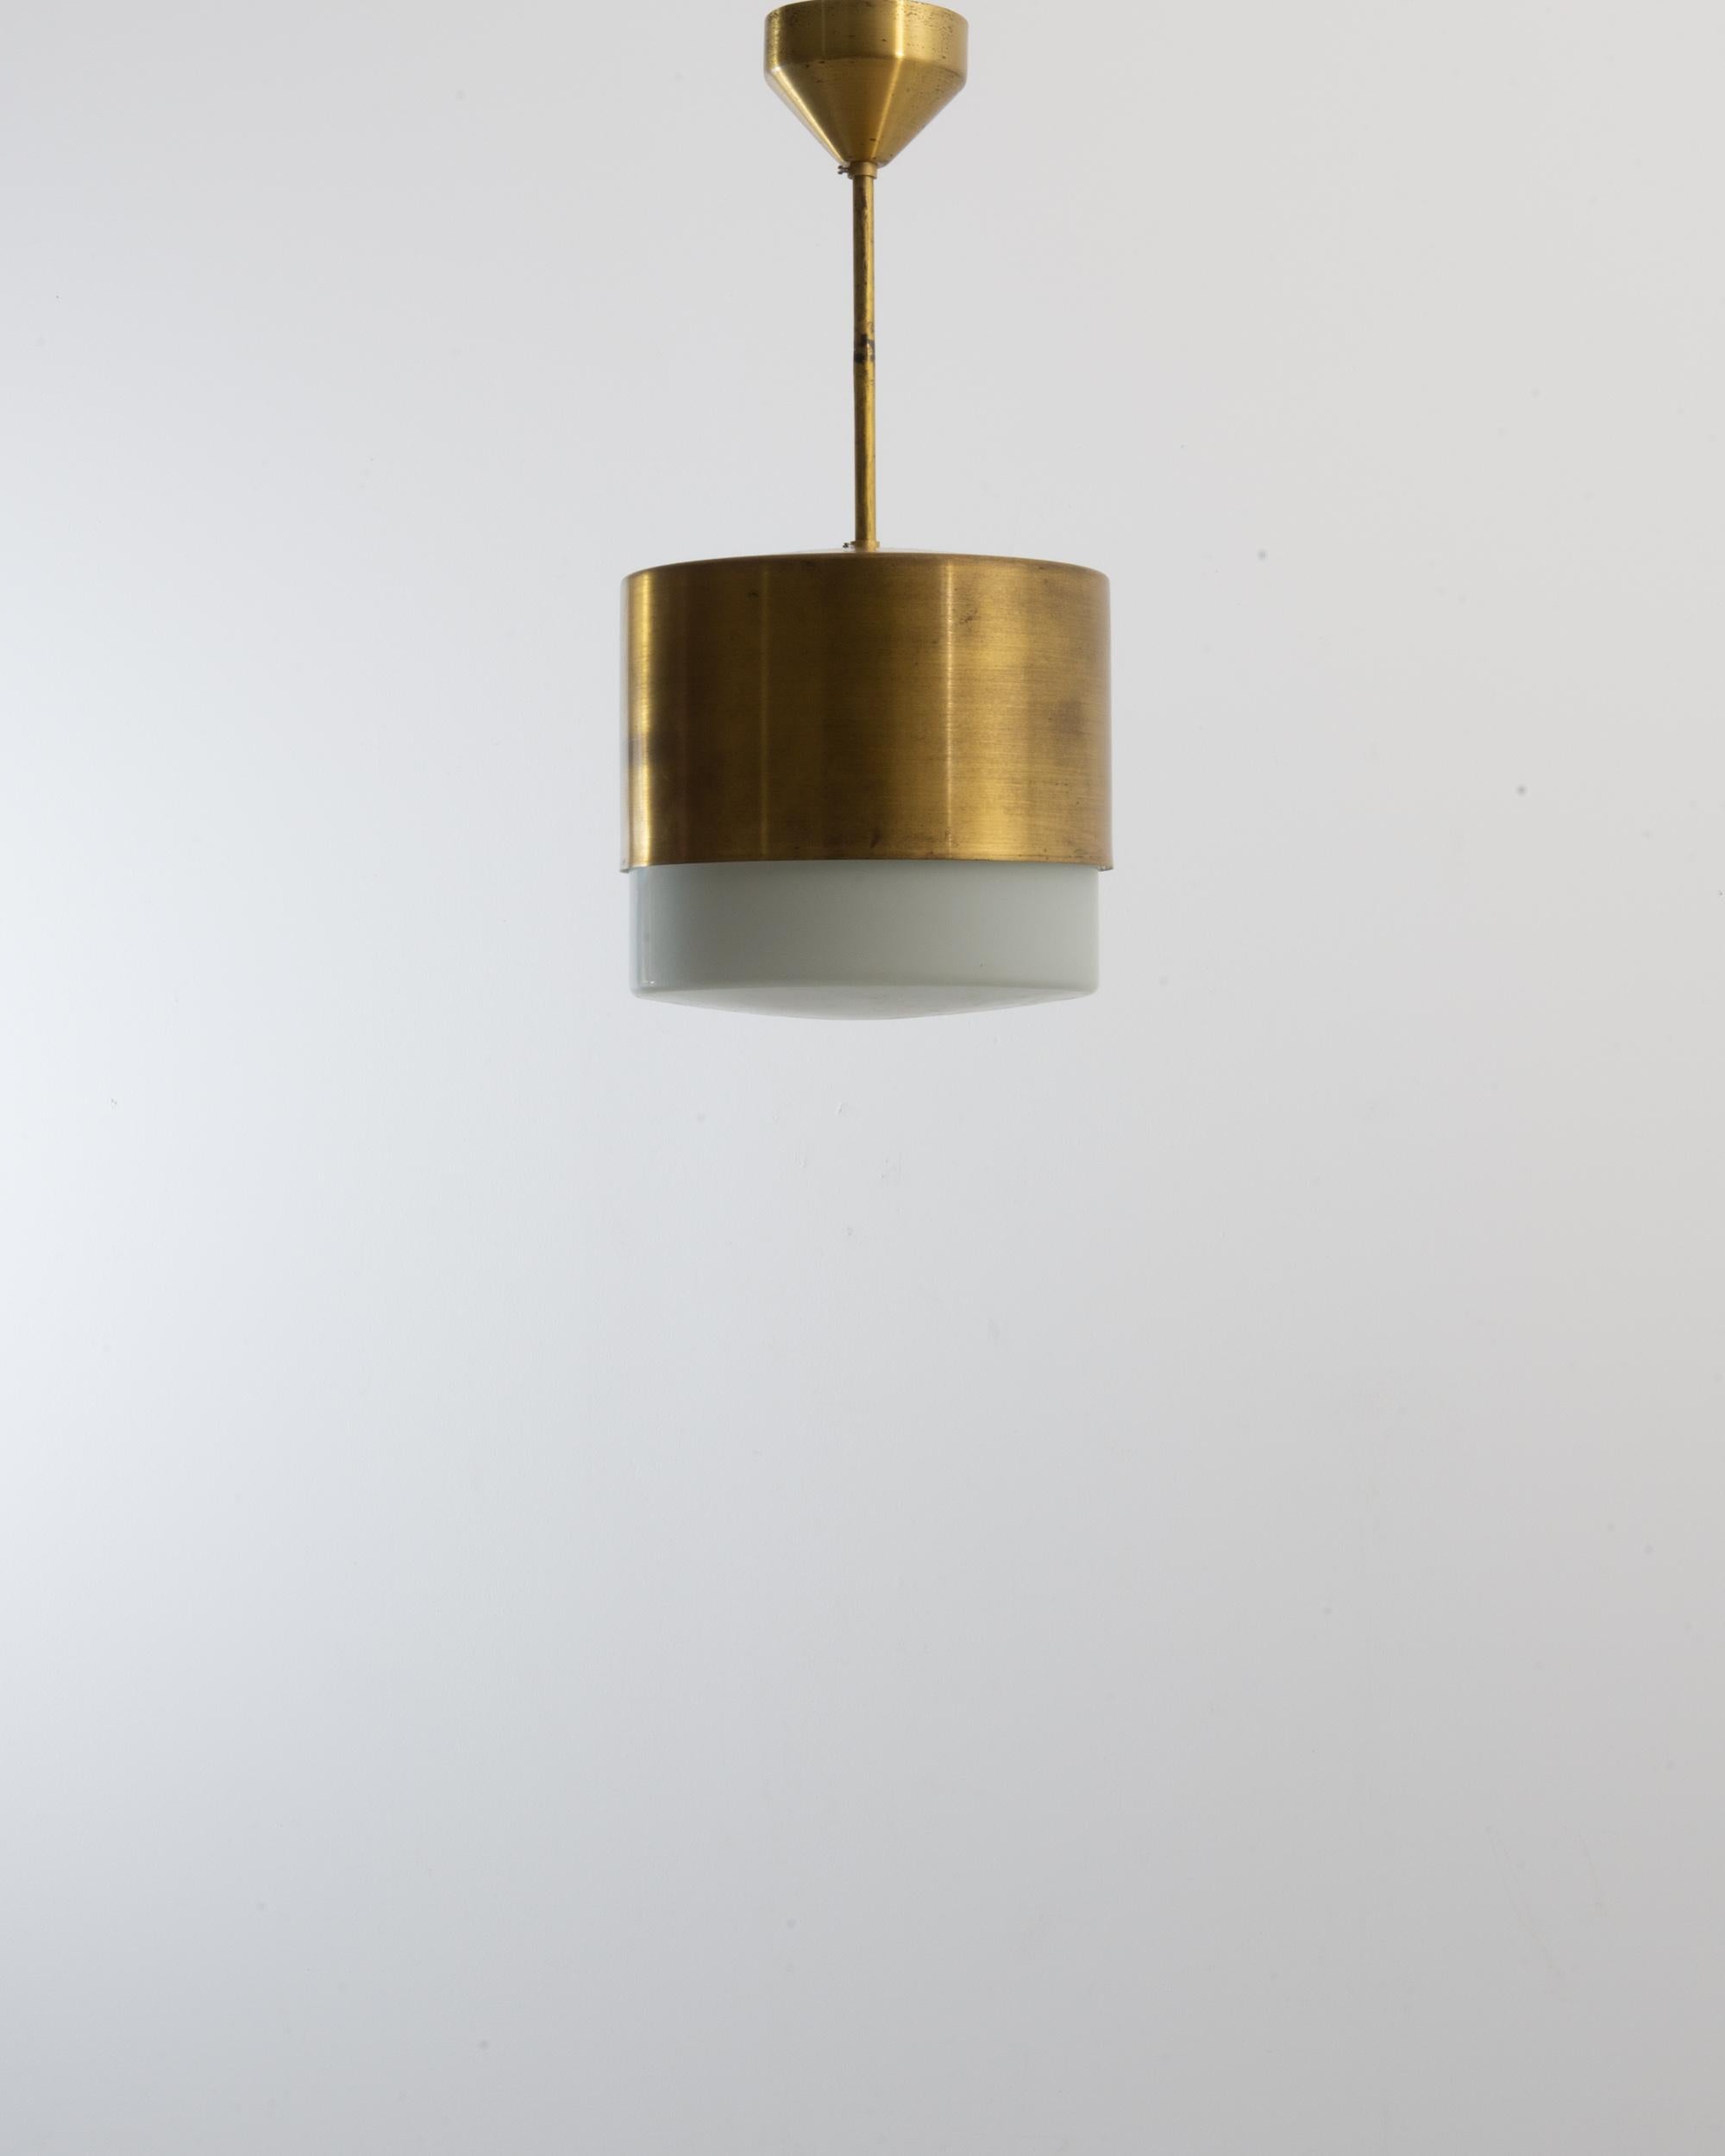 This pendant lamp was produced in Czechia, circa 1970. A vintage gem, this pendant lamp is composed of a gilded brass shade with a discreet brushed finish and a light patina. An opal glass bulb is lodged in the wide cylindrical shade, elegantly